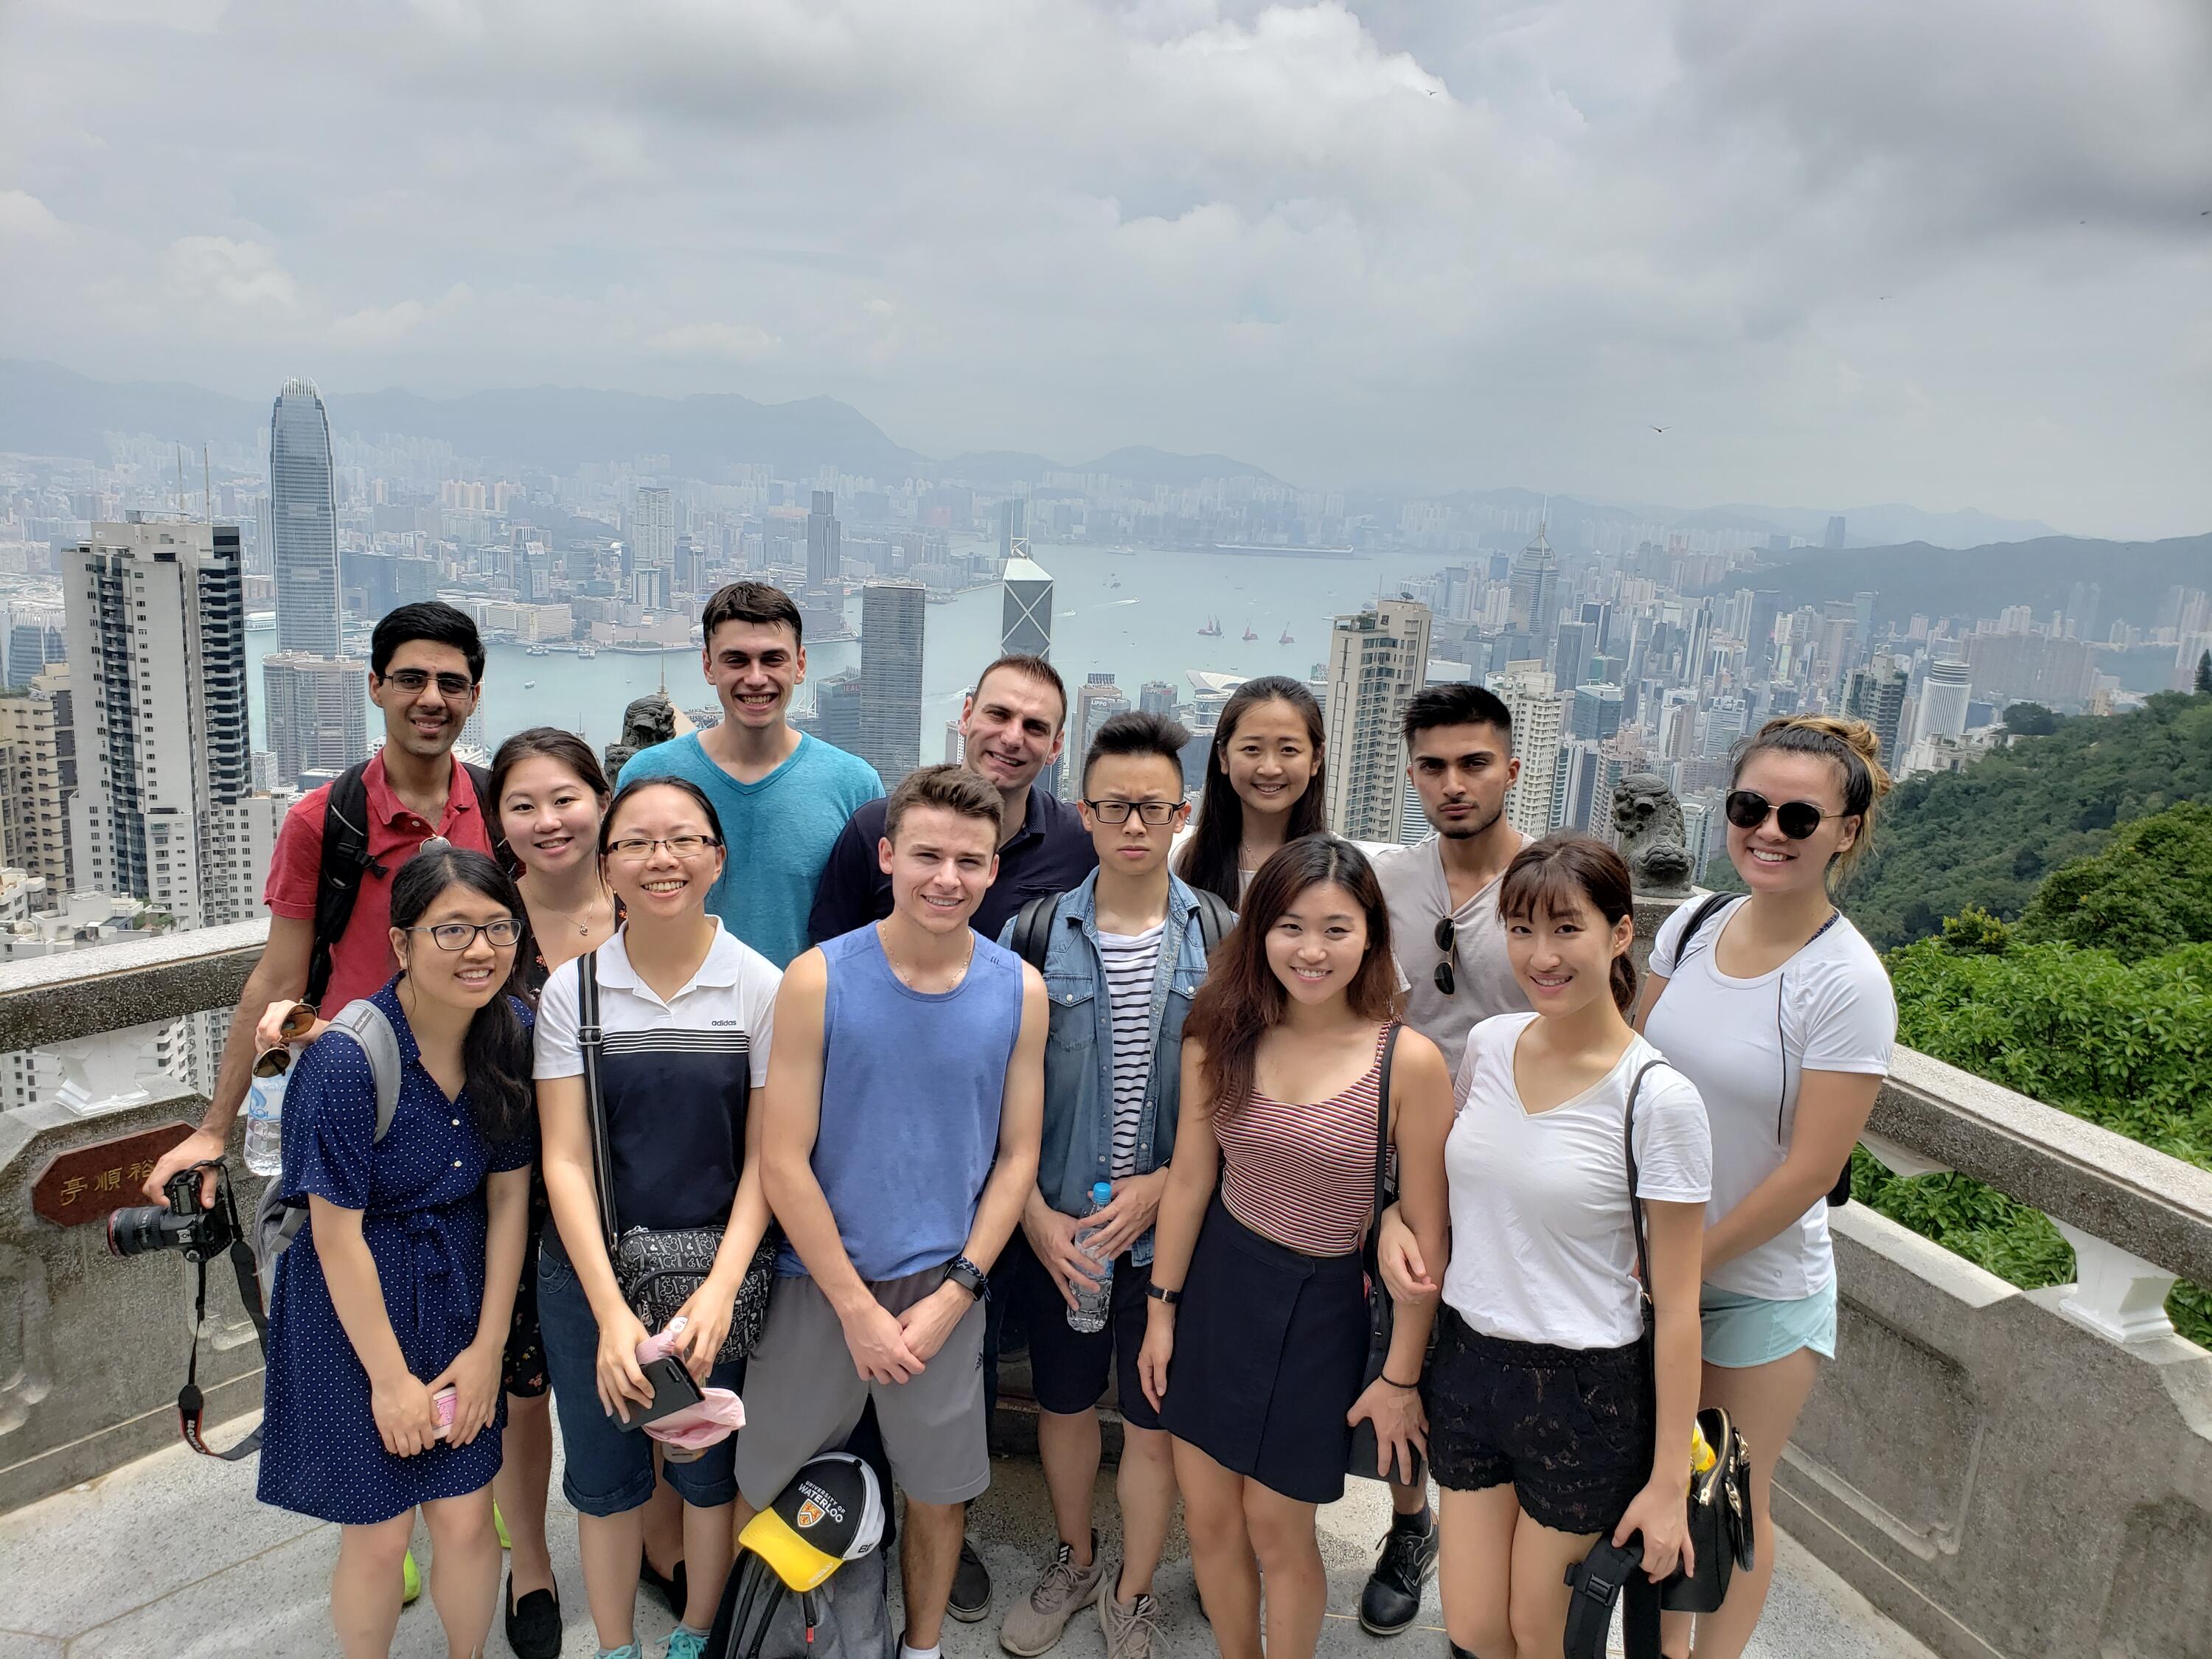 Students in front of the Hong Kong skyline